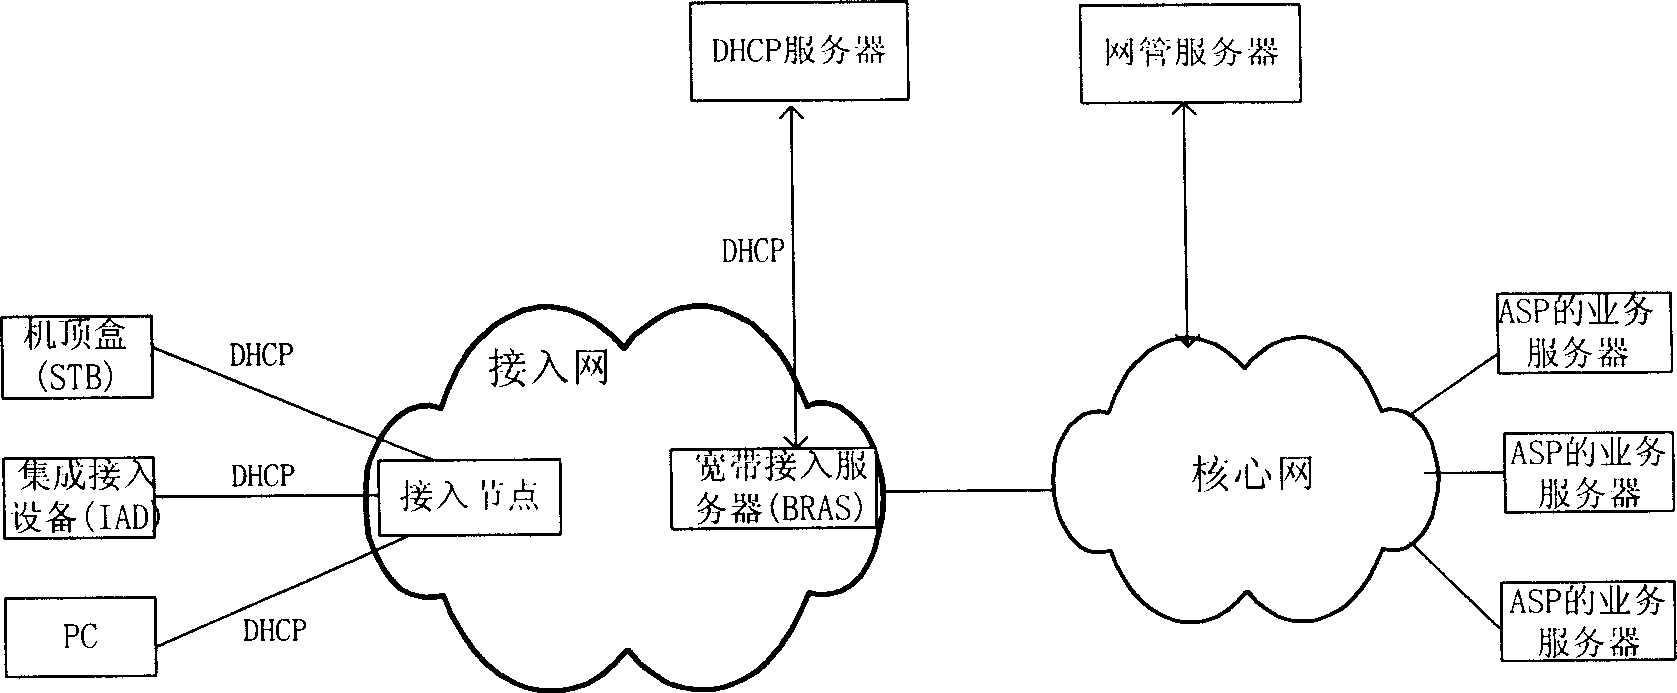 Method for providing business according to its type